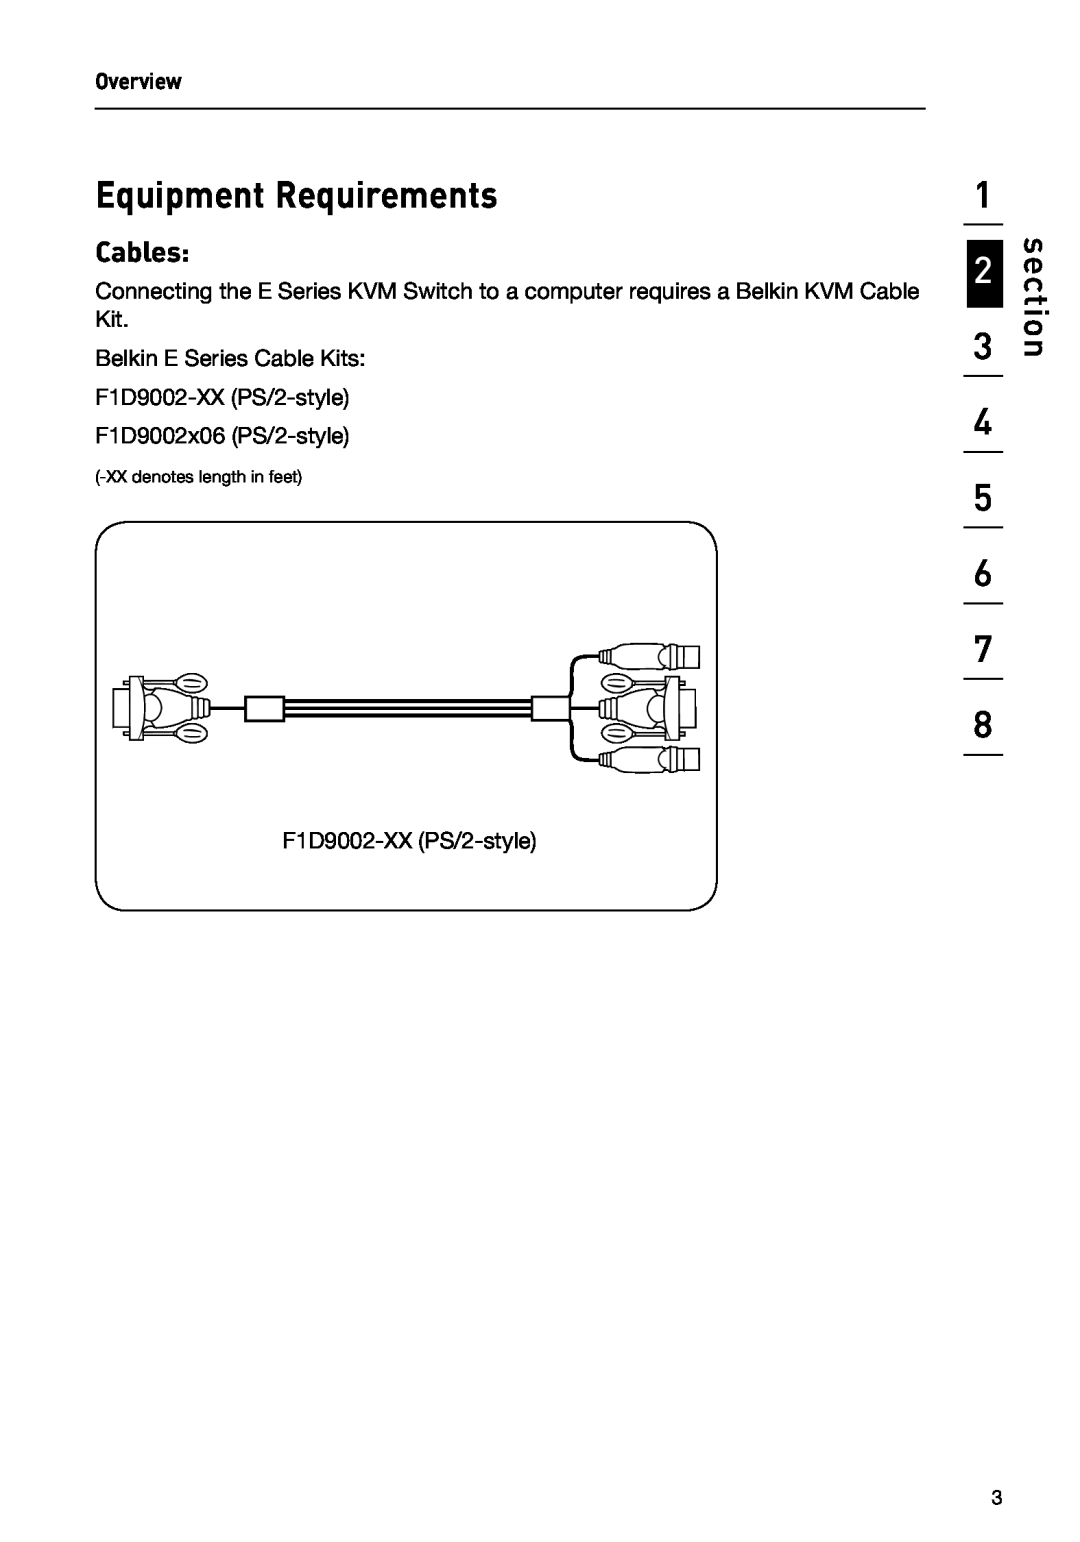 Belkin F1DB102P2 user manual Equipment Requirements, Cables, section, XX denotes length in feet 